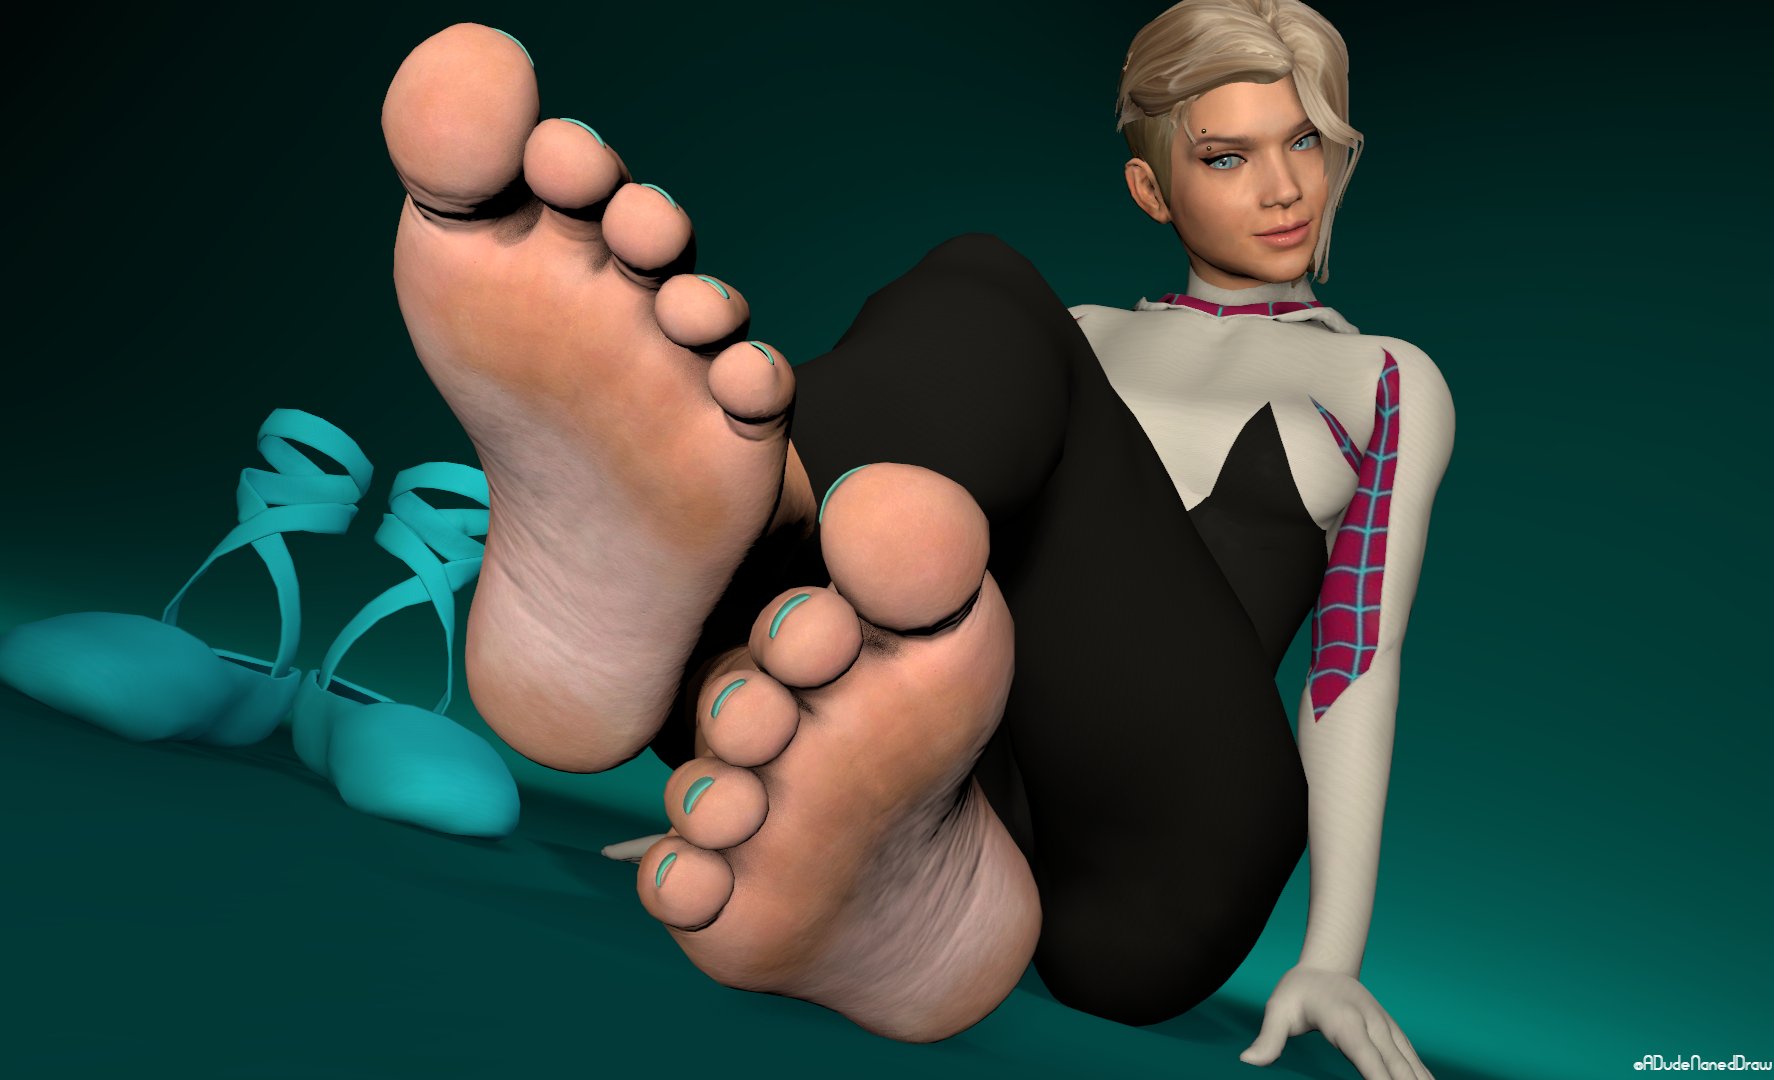 Mr.Draw 🔞 on Twitter: "Can't get enough of Spider-Gwen feets htt...